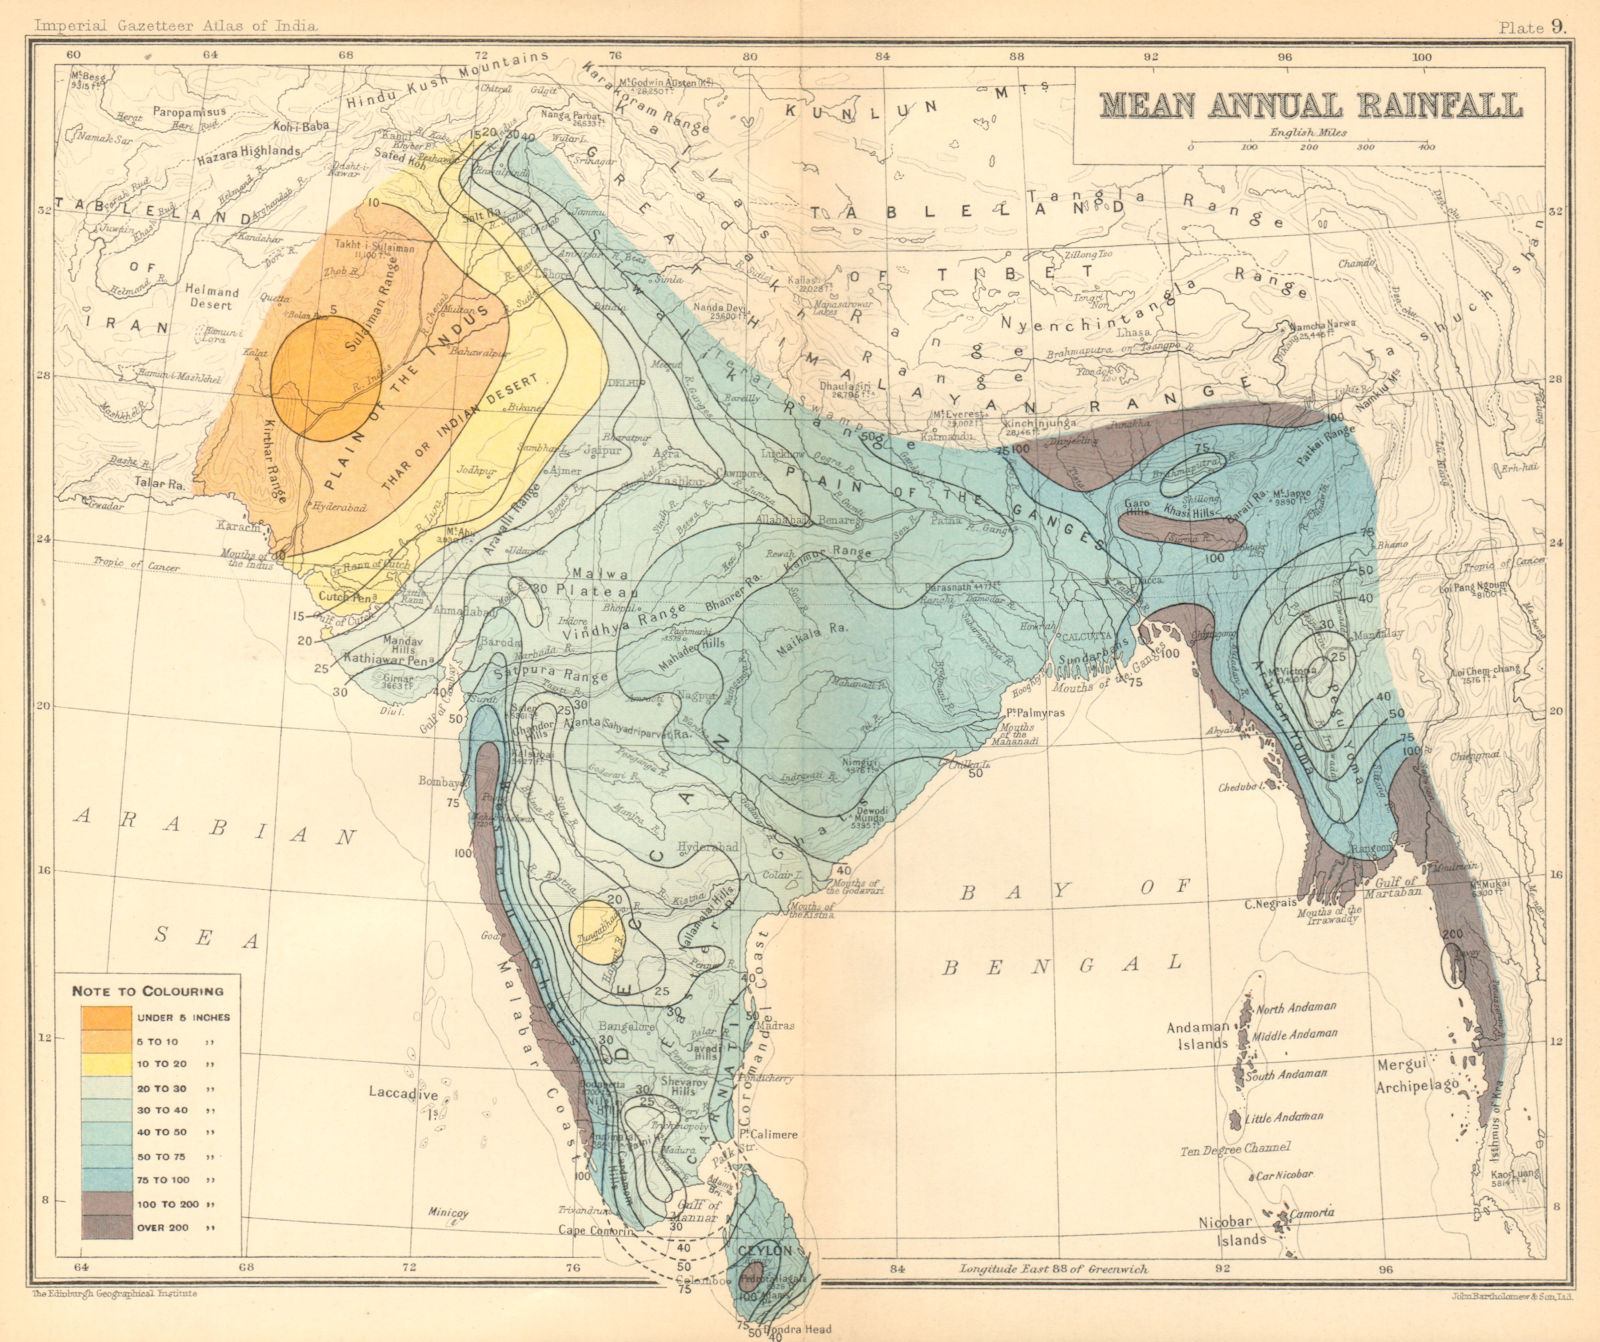 SOUTH ASIA. British India & Burma. Mean Annual Rainfall 1931 old vintage map